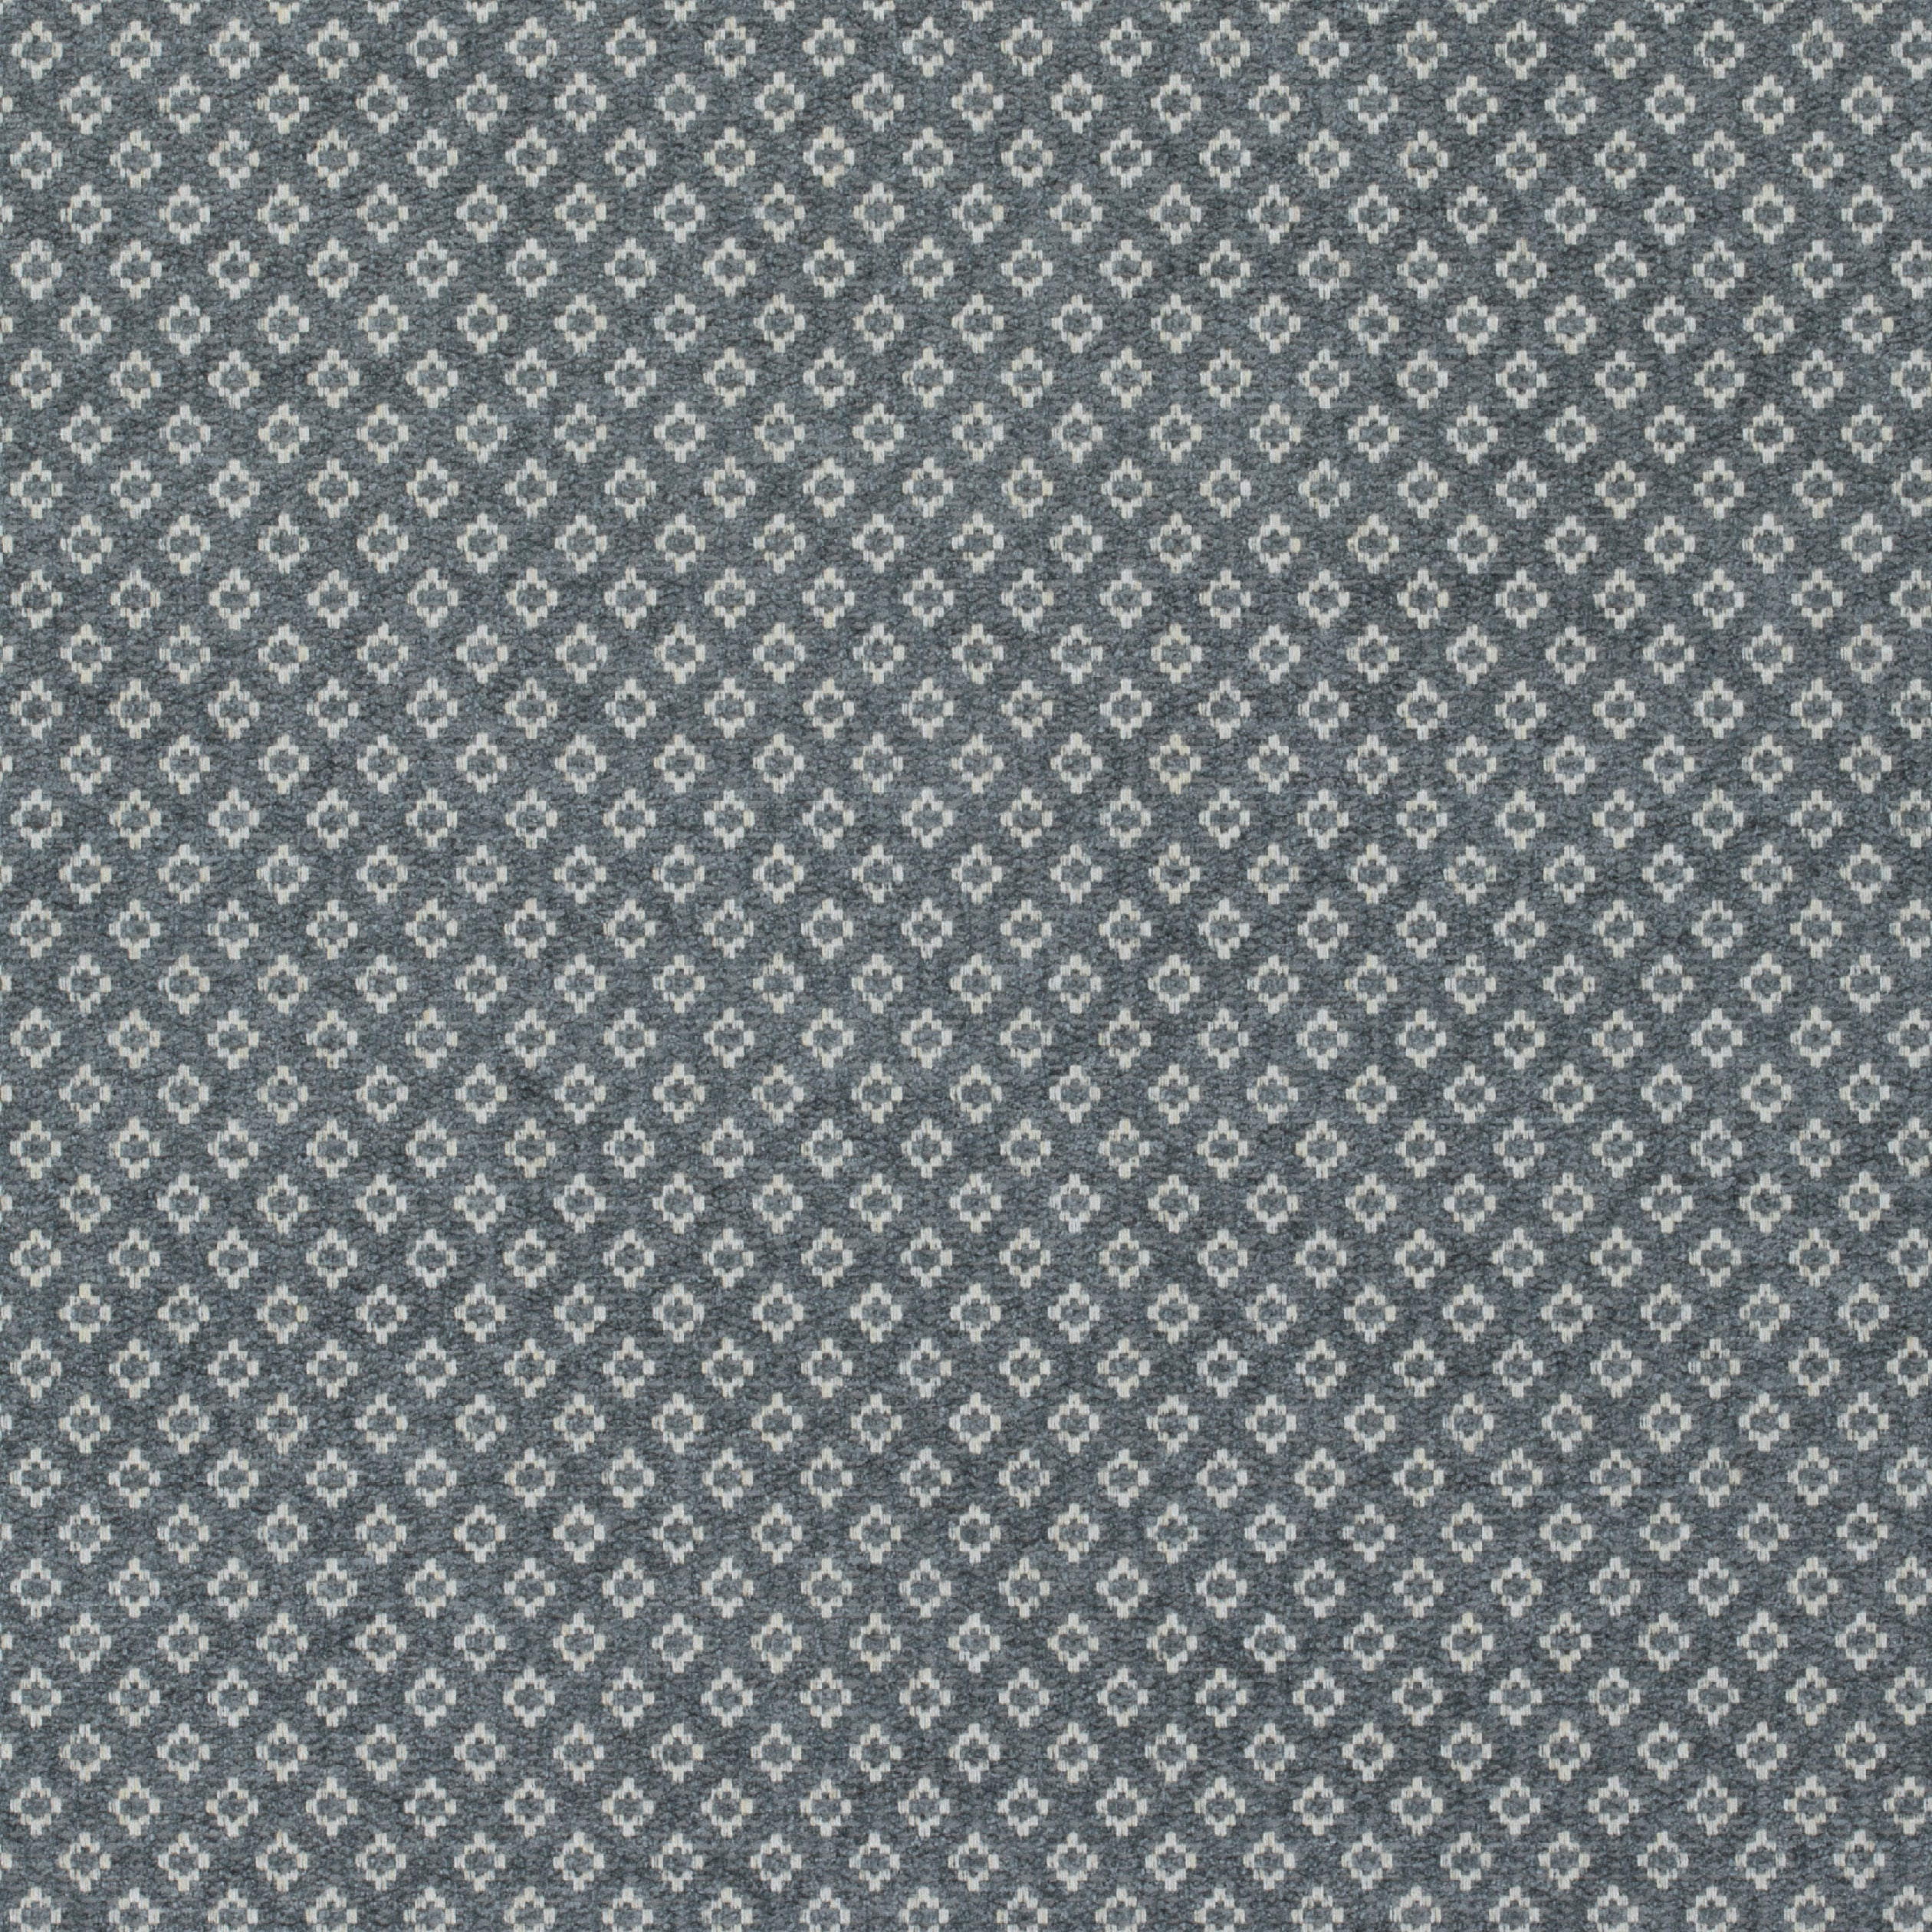 Claudio fabric in charcoal color - pattern number AW72999 - by Anna French in the Manor collection